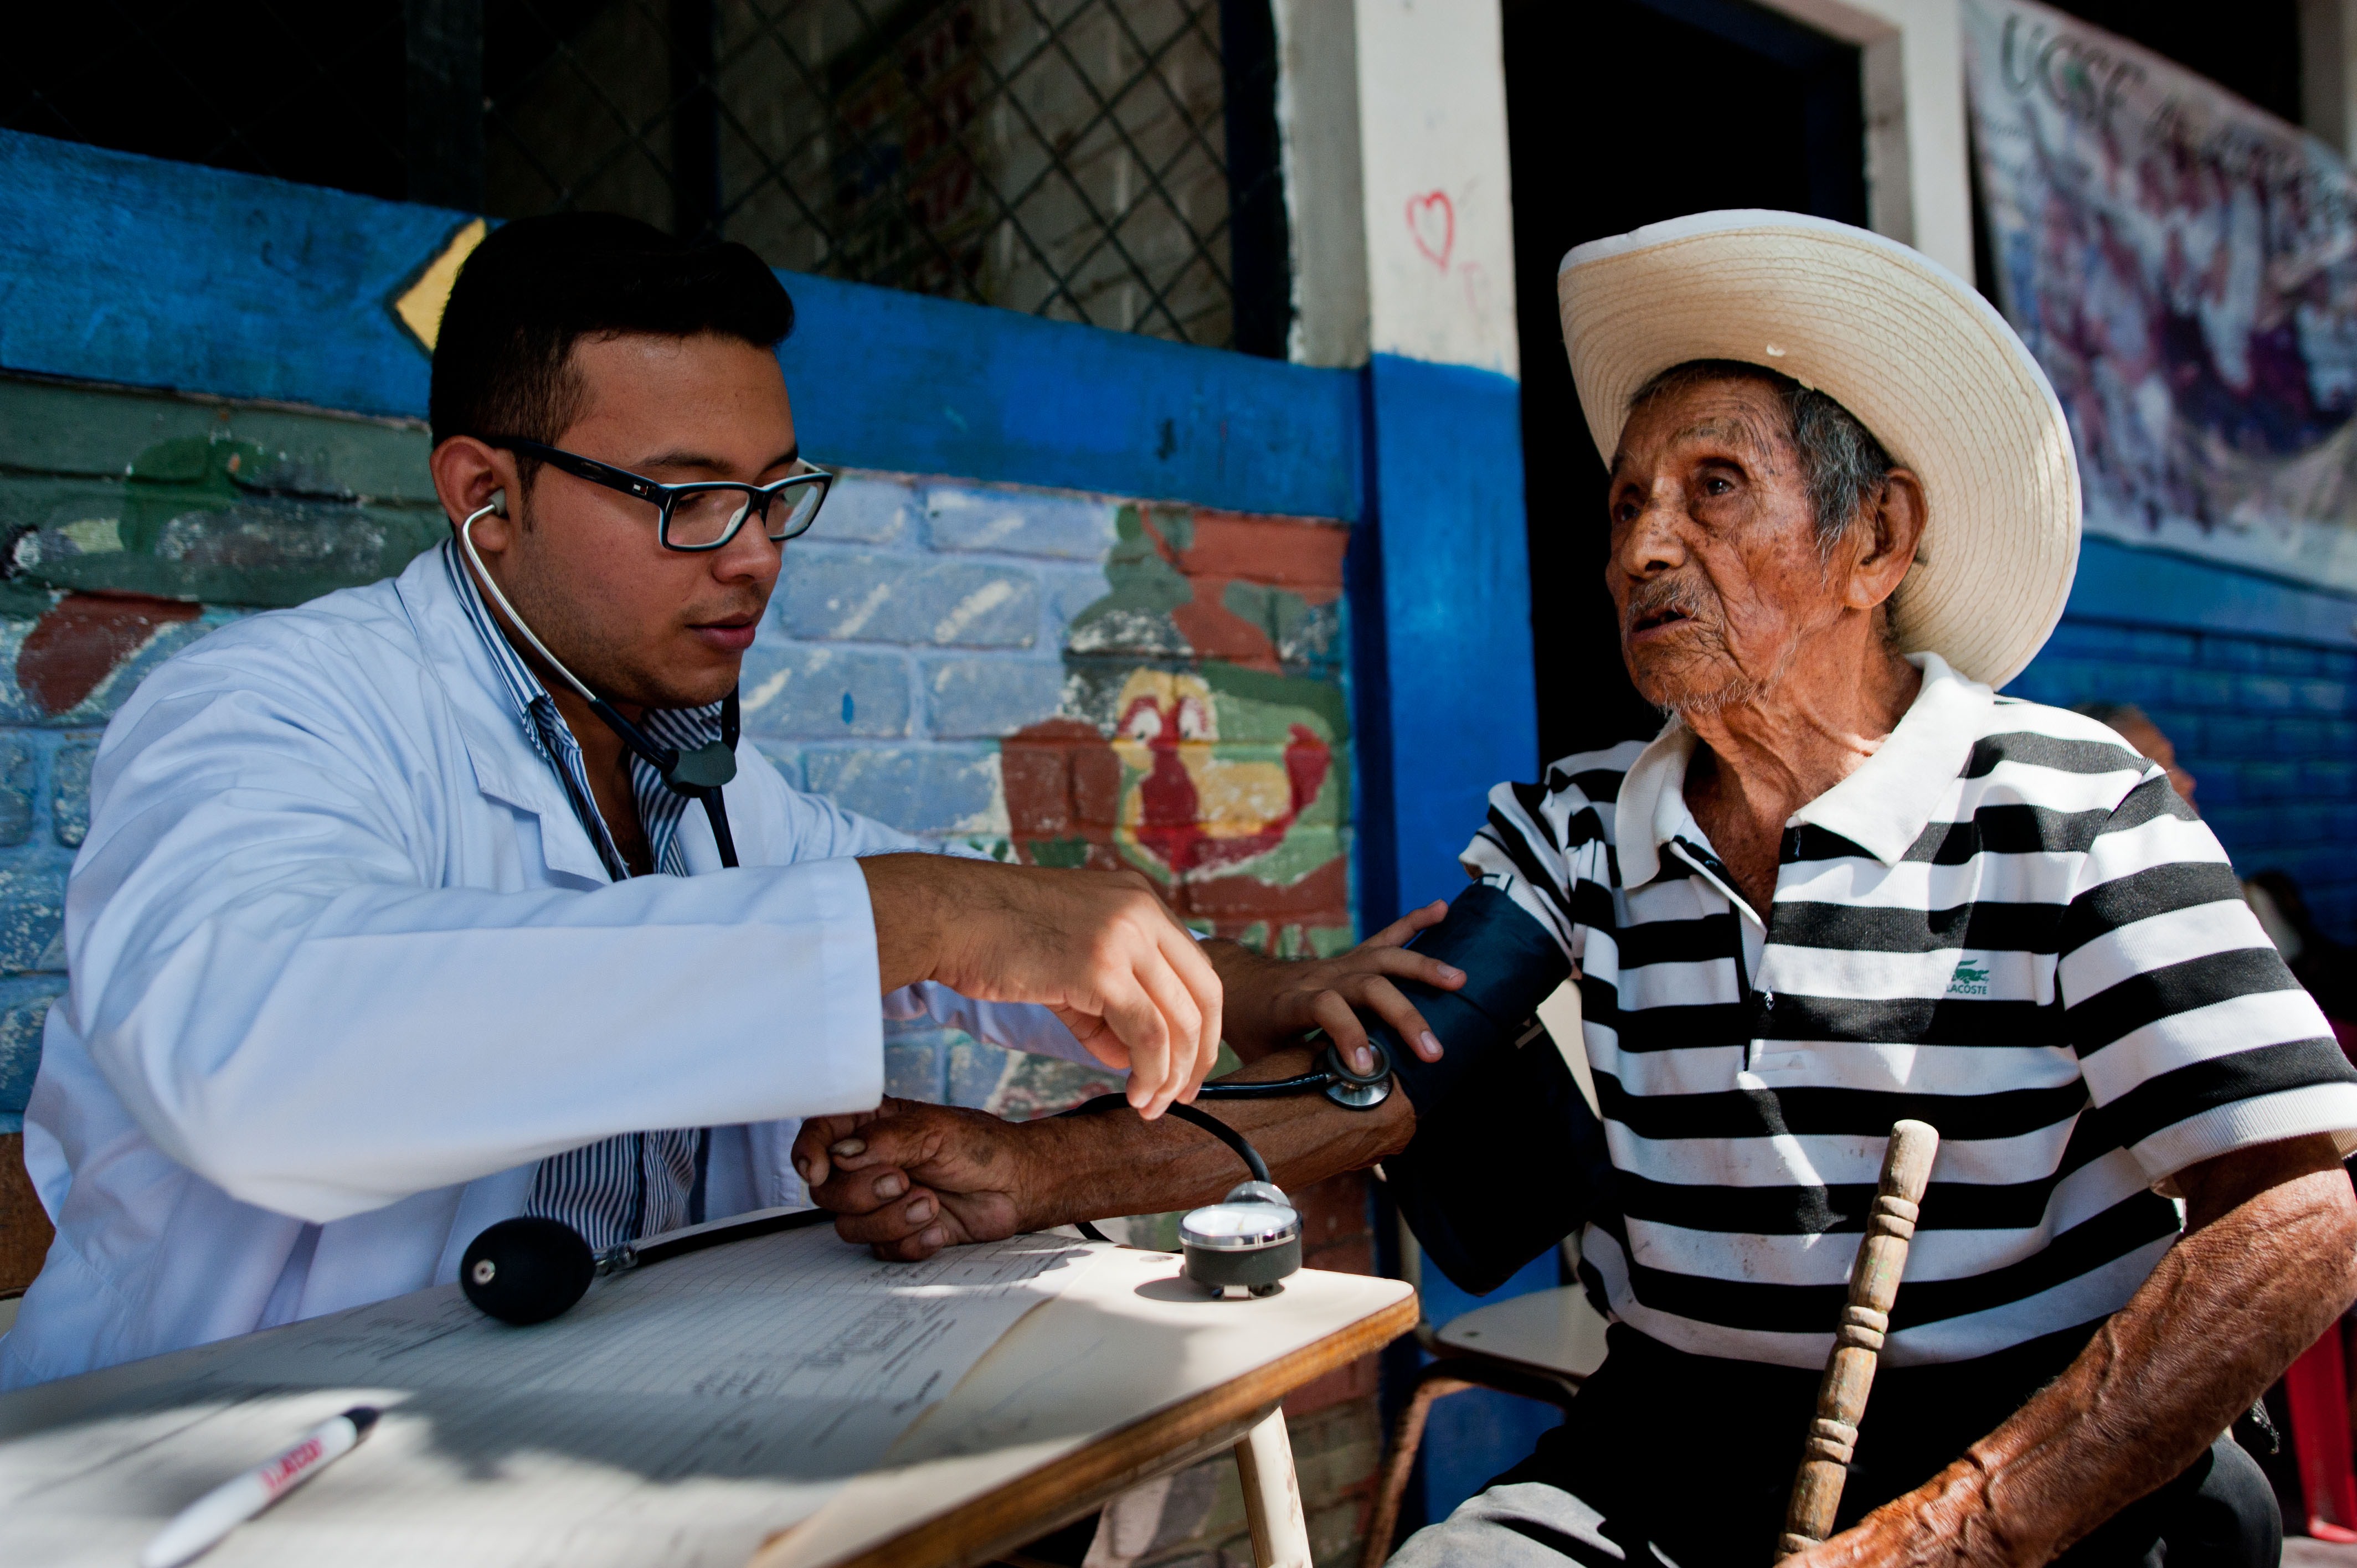 A doctor examines a patient during a medical brigade to detect suspicious cases of Chikungunya fever in a school of the town of Ayutuxtepeque, 4 km north of San Salvador, El Salvador on June 18, 2014. (Jose Cabezas—AFP/Getty Images)